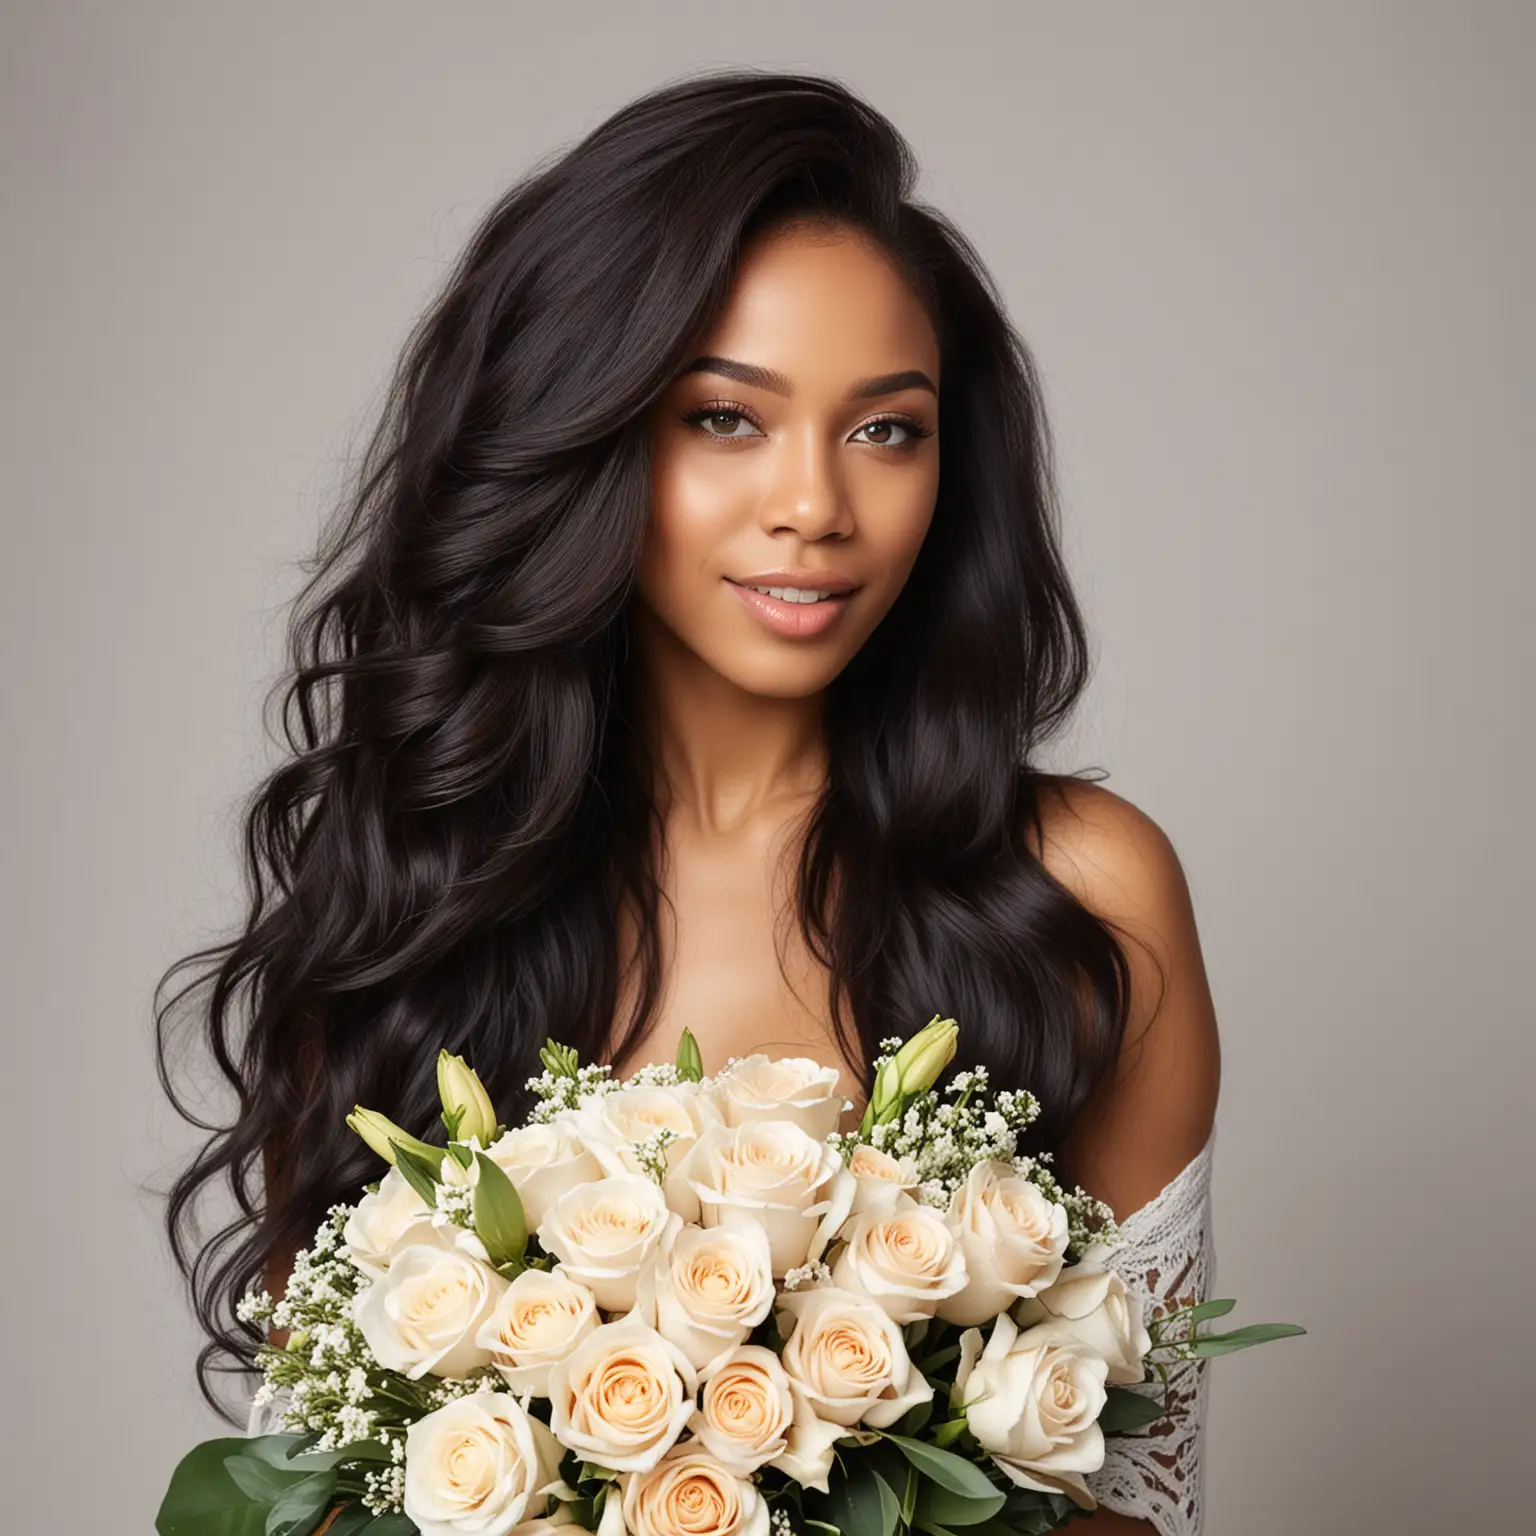 Luxurious Black Woman with Long Hair and Flower Bouquet